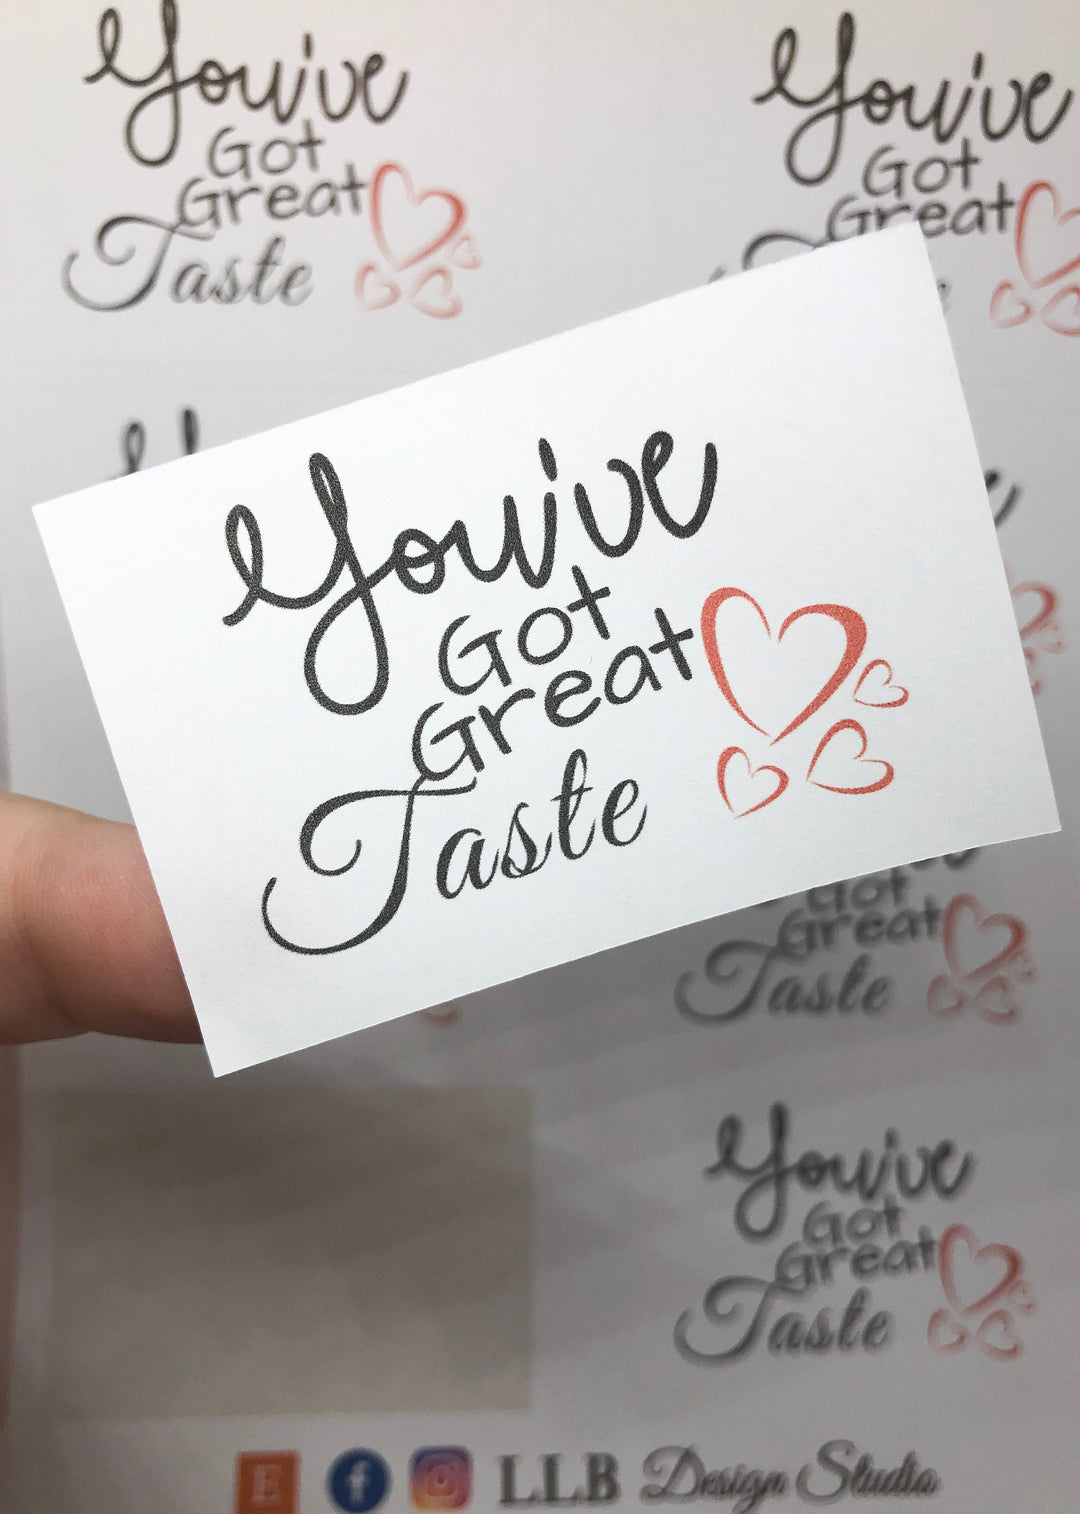 You've Got Great Taste Stickers | Packaging Stickers | Business Branding | Small Shop Stickers | Sticker #: S0120 | Ready To Ship